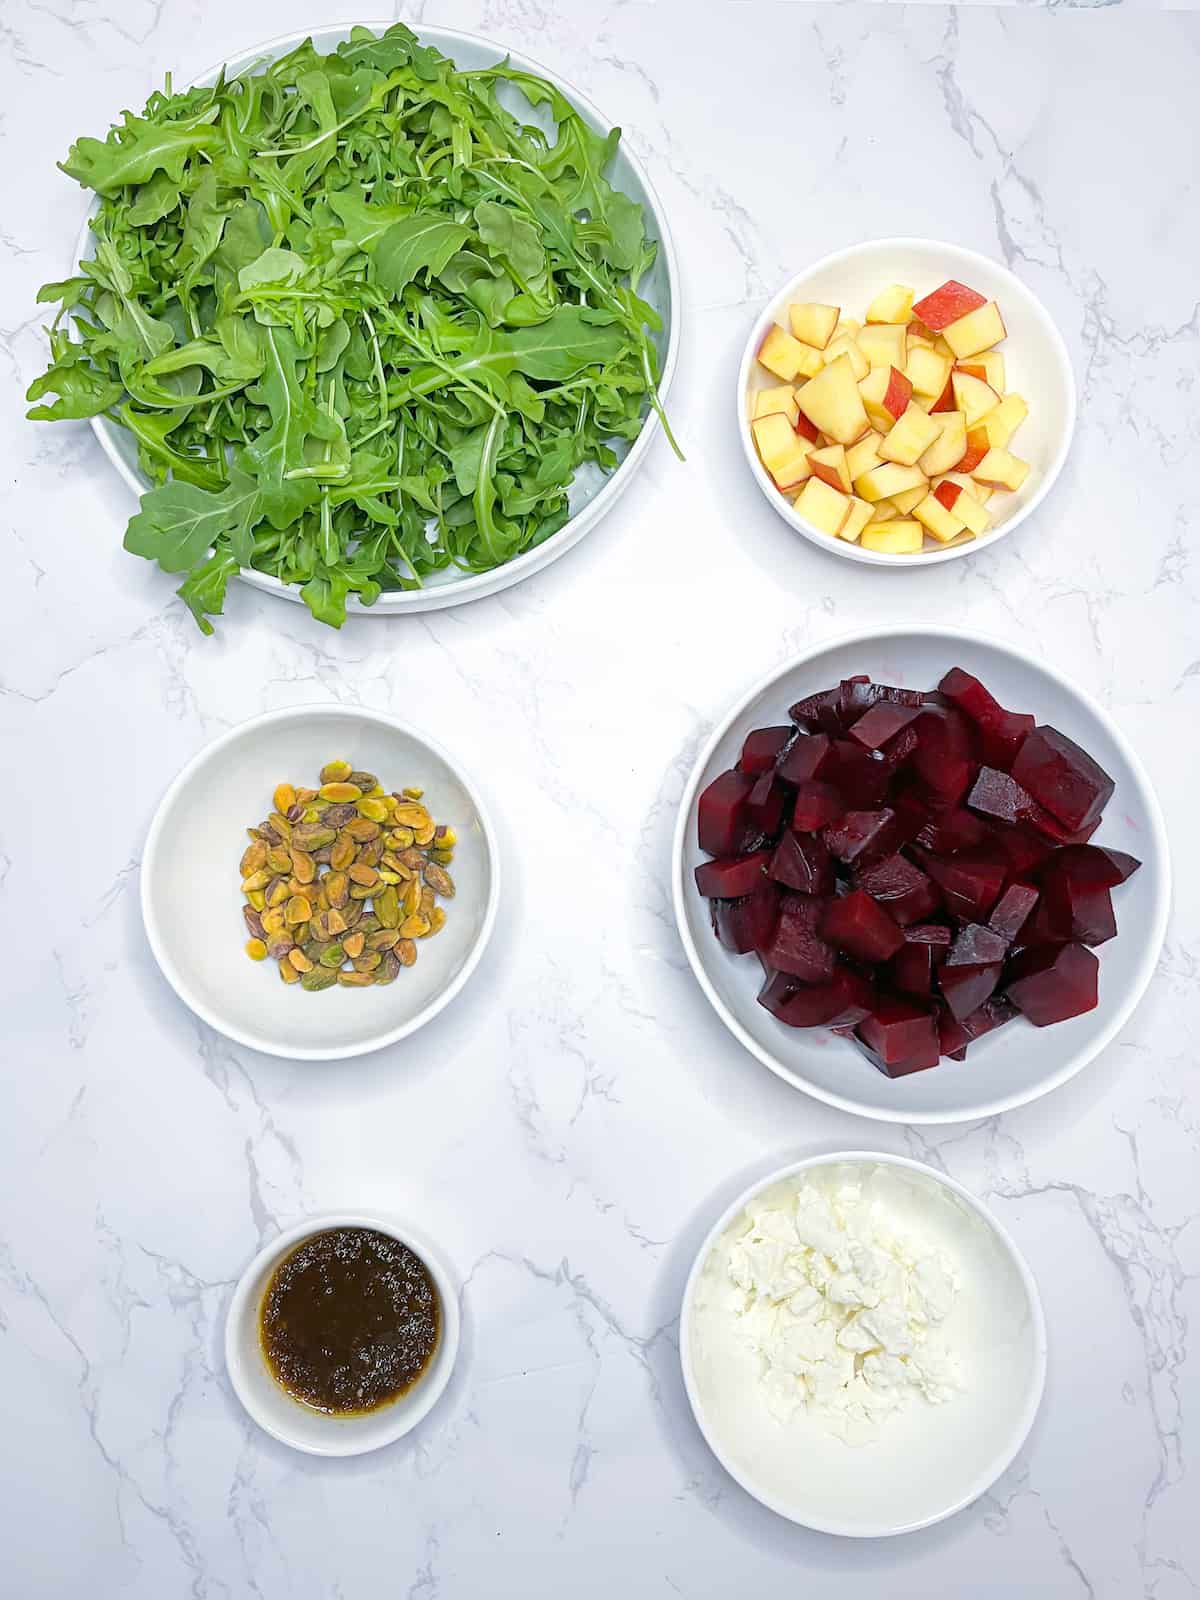 Beet and arugula salad with goat cheese ingredients on a table